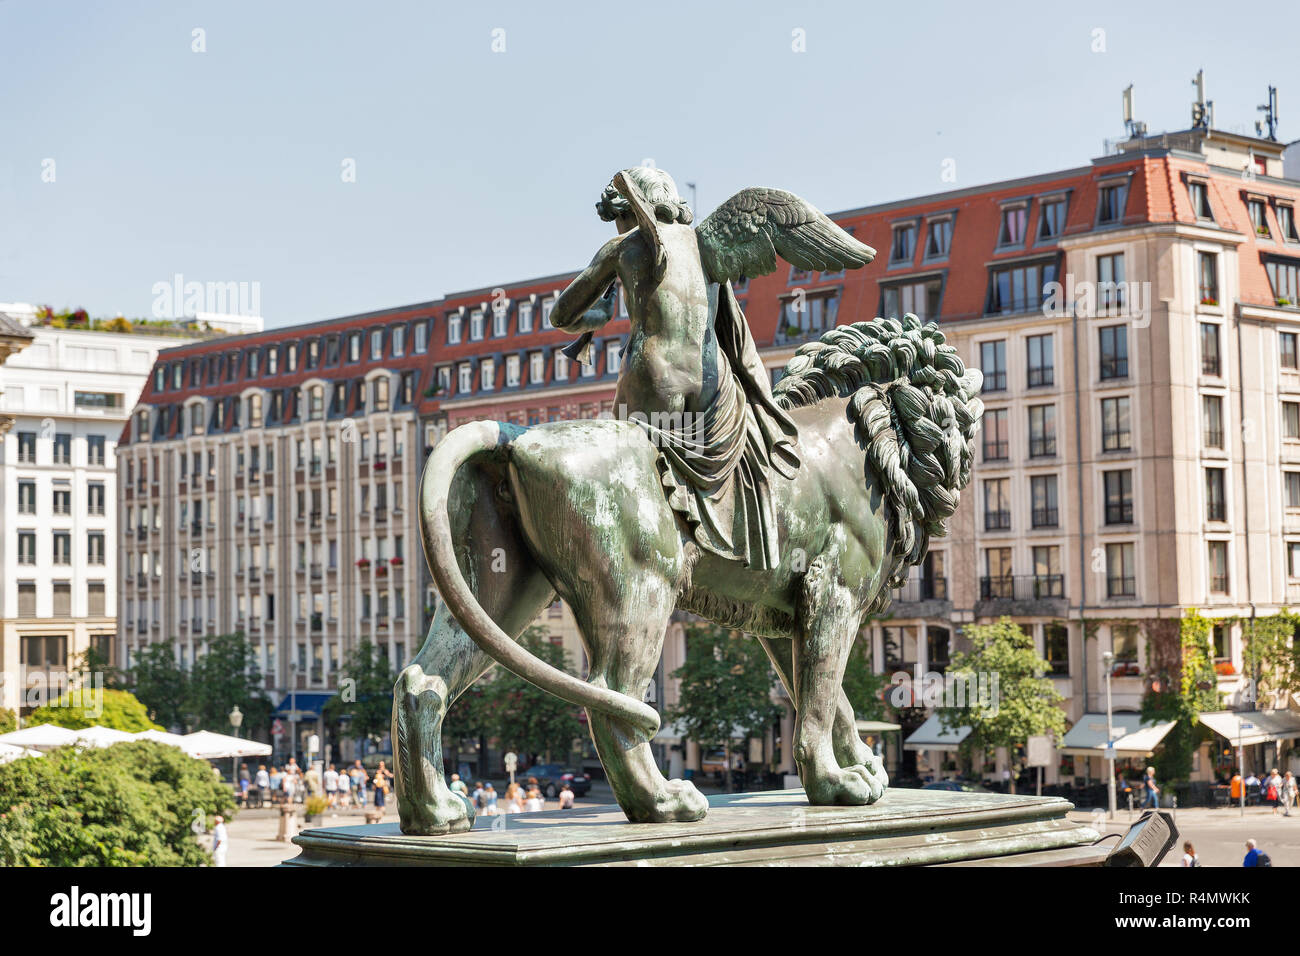 Bronze lion statue in front of the Berlin Concert Hall or Konzerthaus on Gendarmenmarkt square, Germany. Side view. Stock Photo